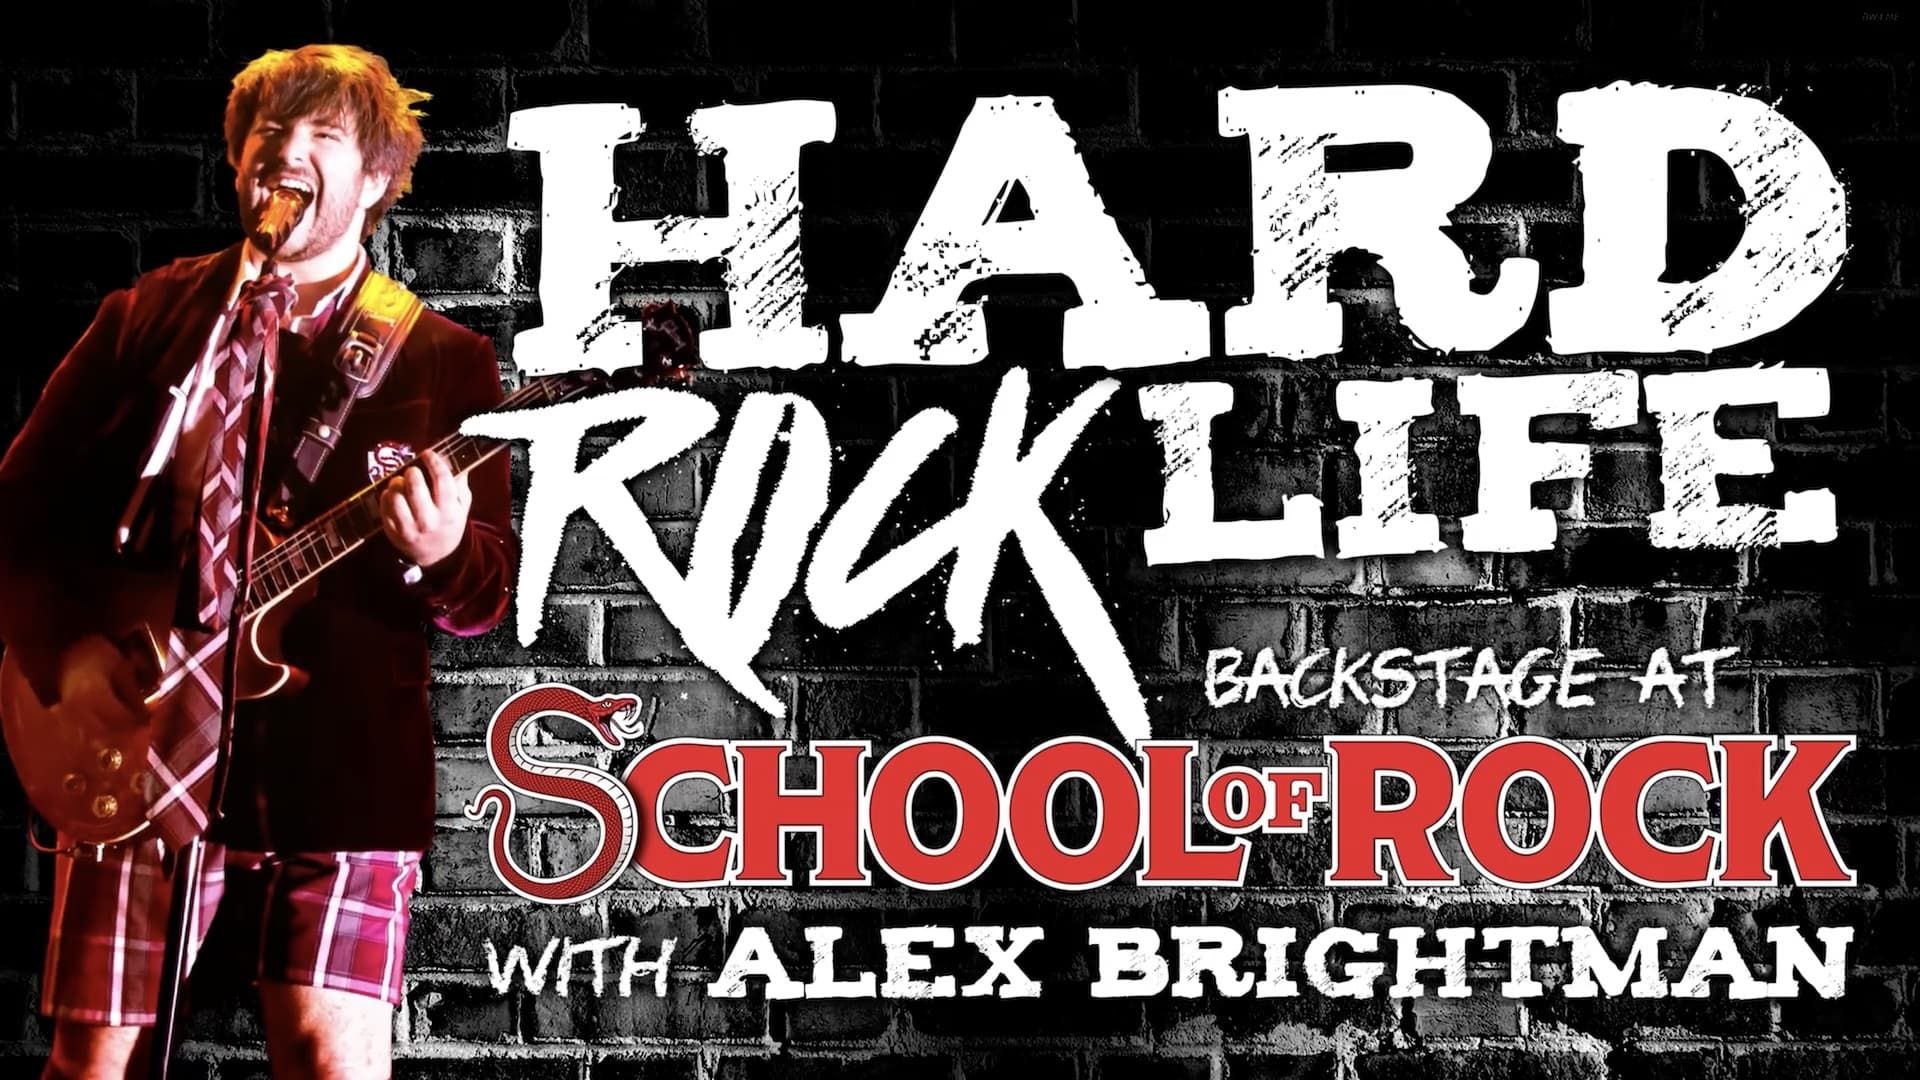 Hard Rock Life: Backstage at 'School of Rock' with Alex Brightman background